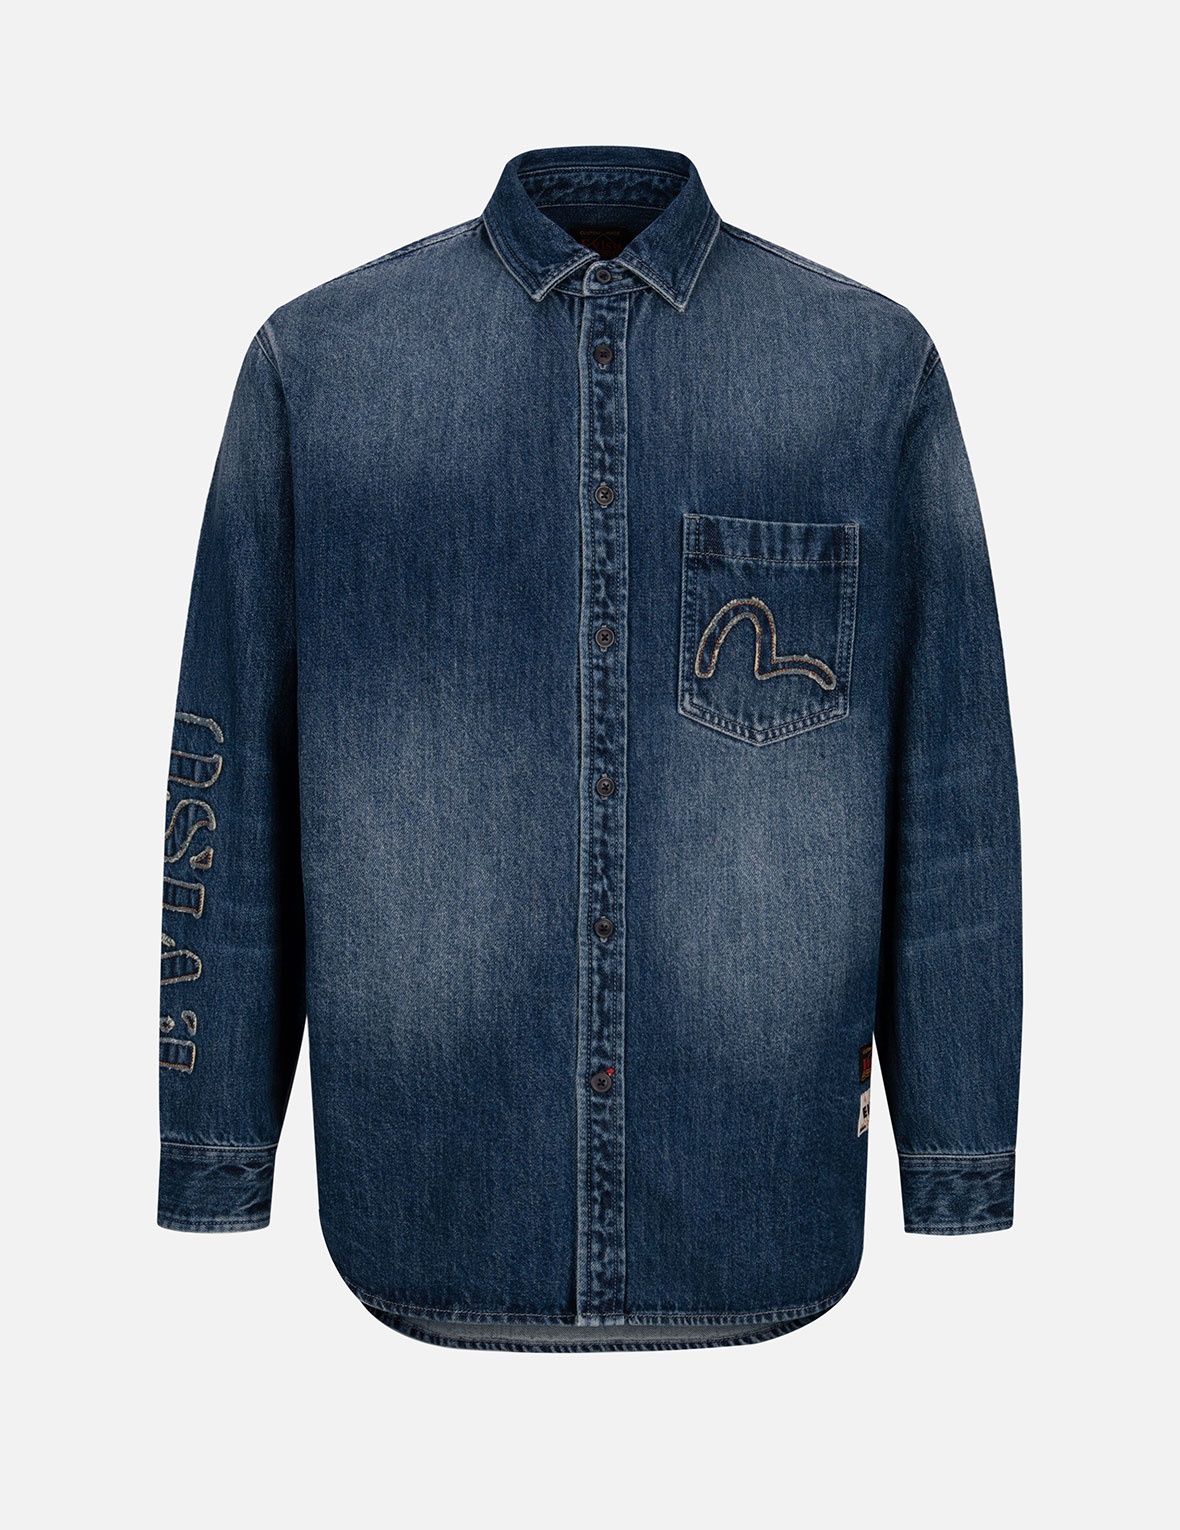 GRUNGE STYLE LOGO AND SEAGULL APPLIQUÉ RELAX FIT DENIM SHIRT - 2